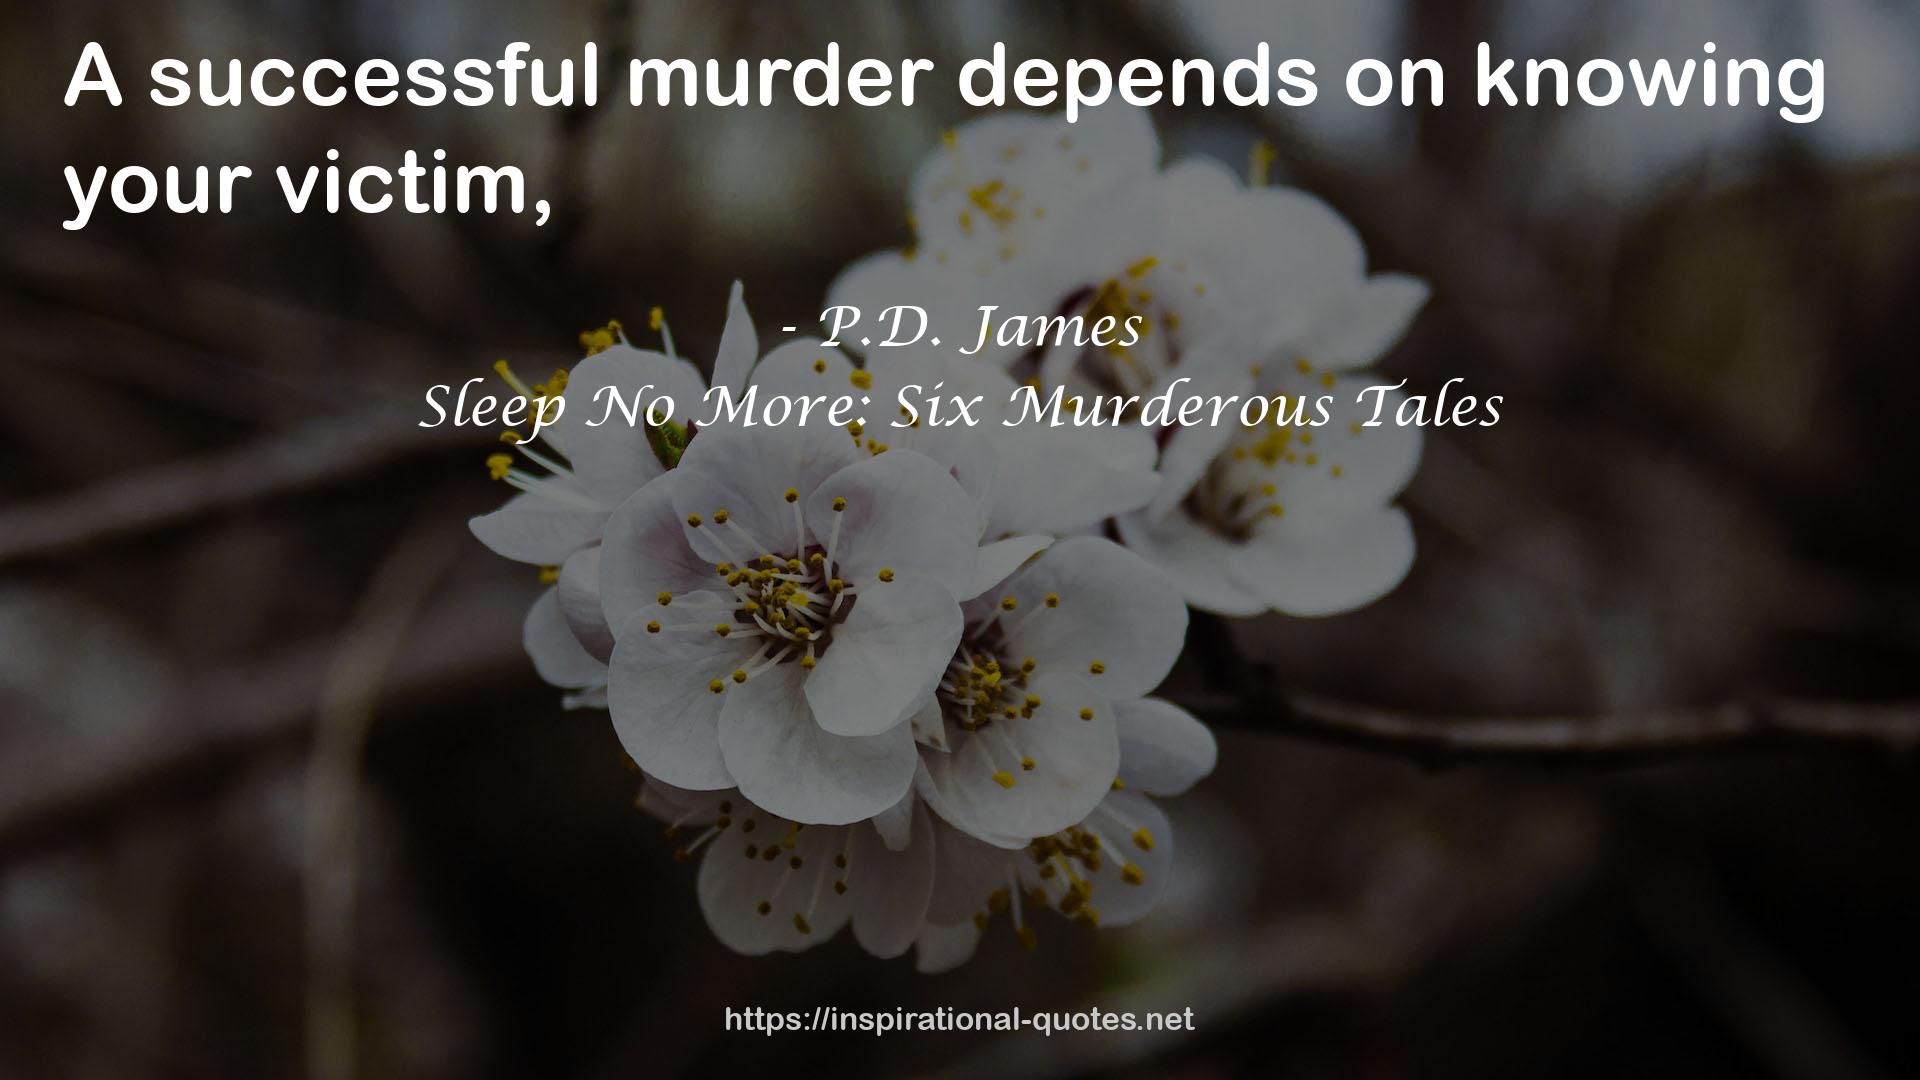 Sleep No More: Six Murderous Tales QUOTES